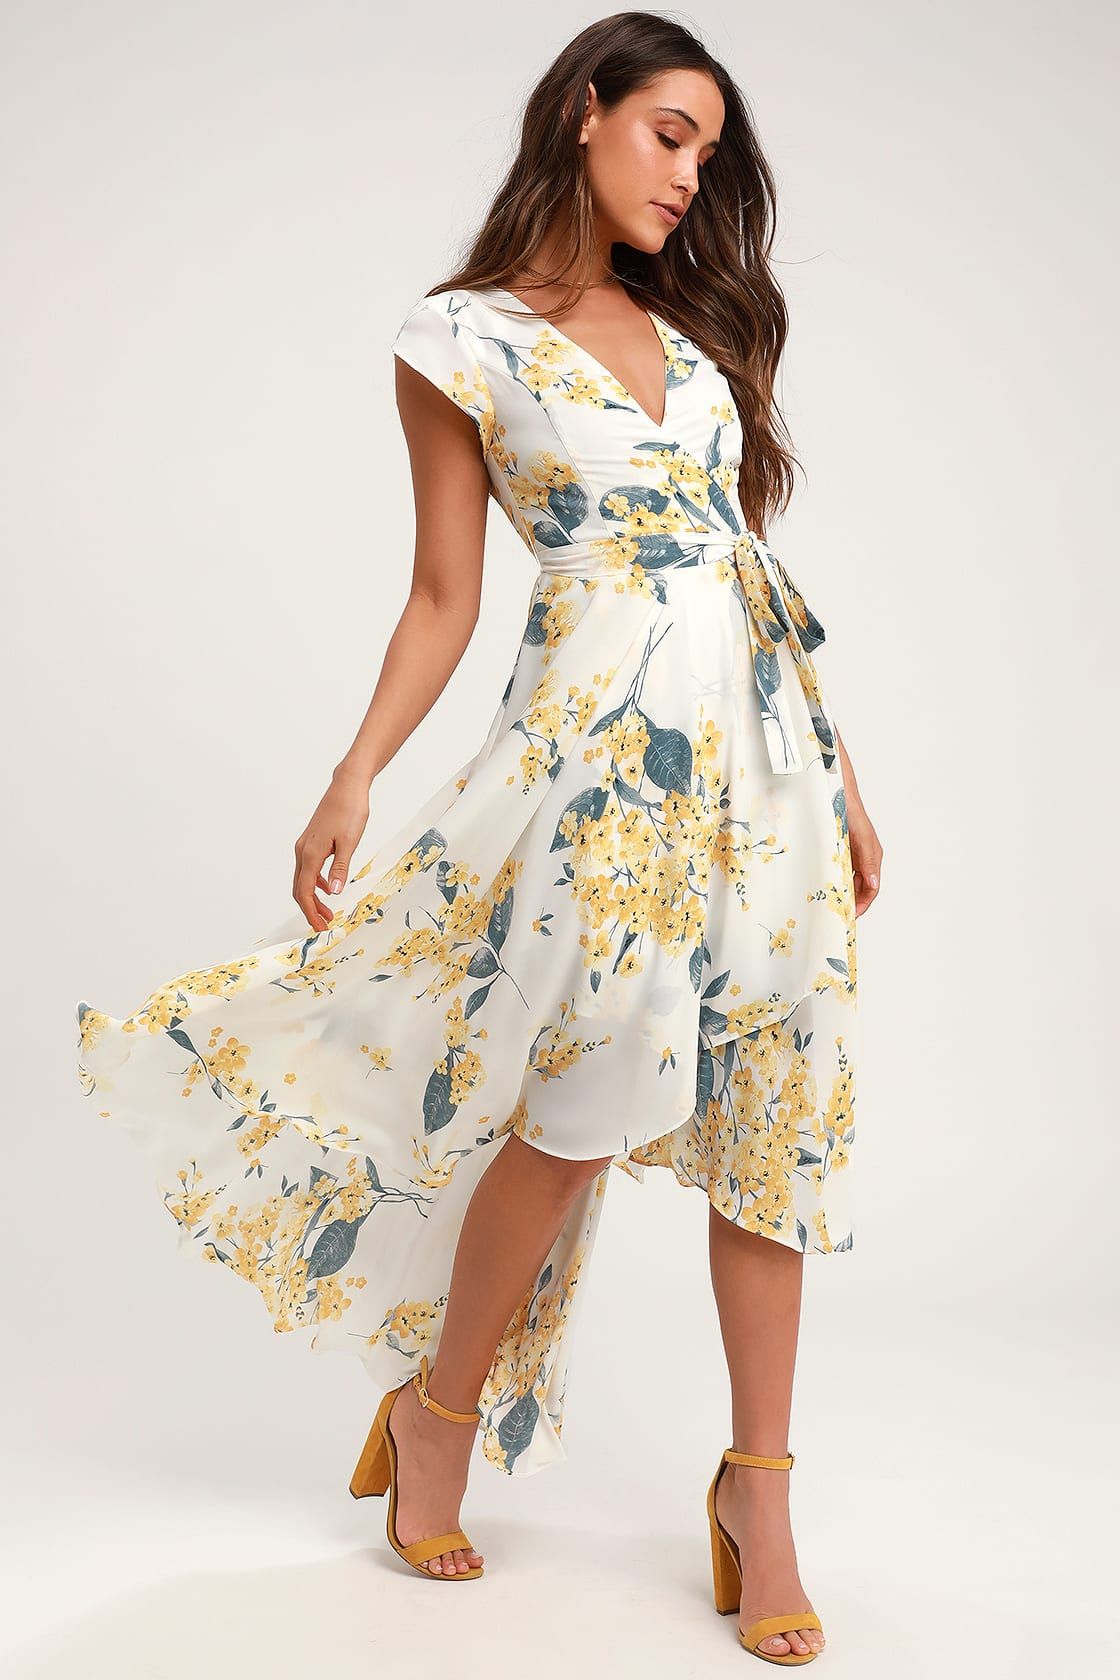 French Countryside White and Yellow Floral Print High-Low Dress | Lulus (US)